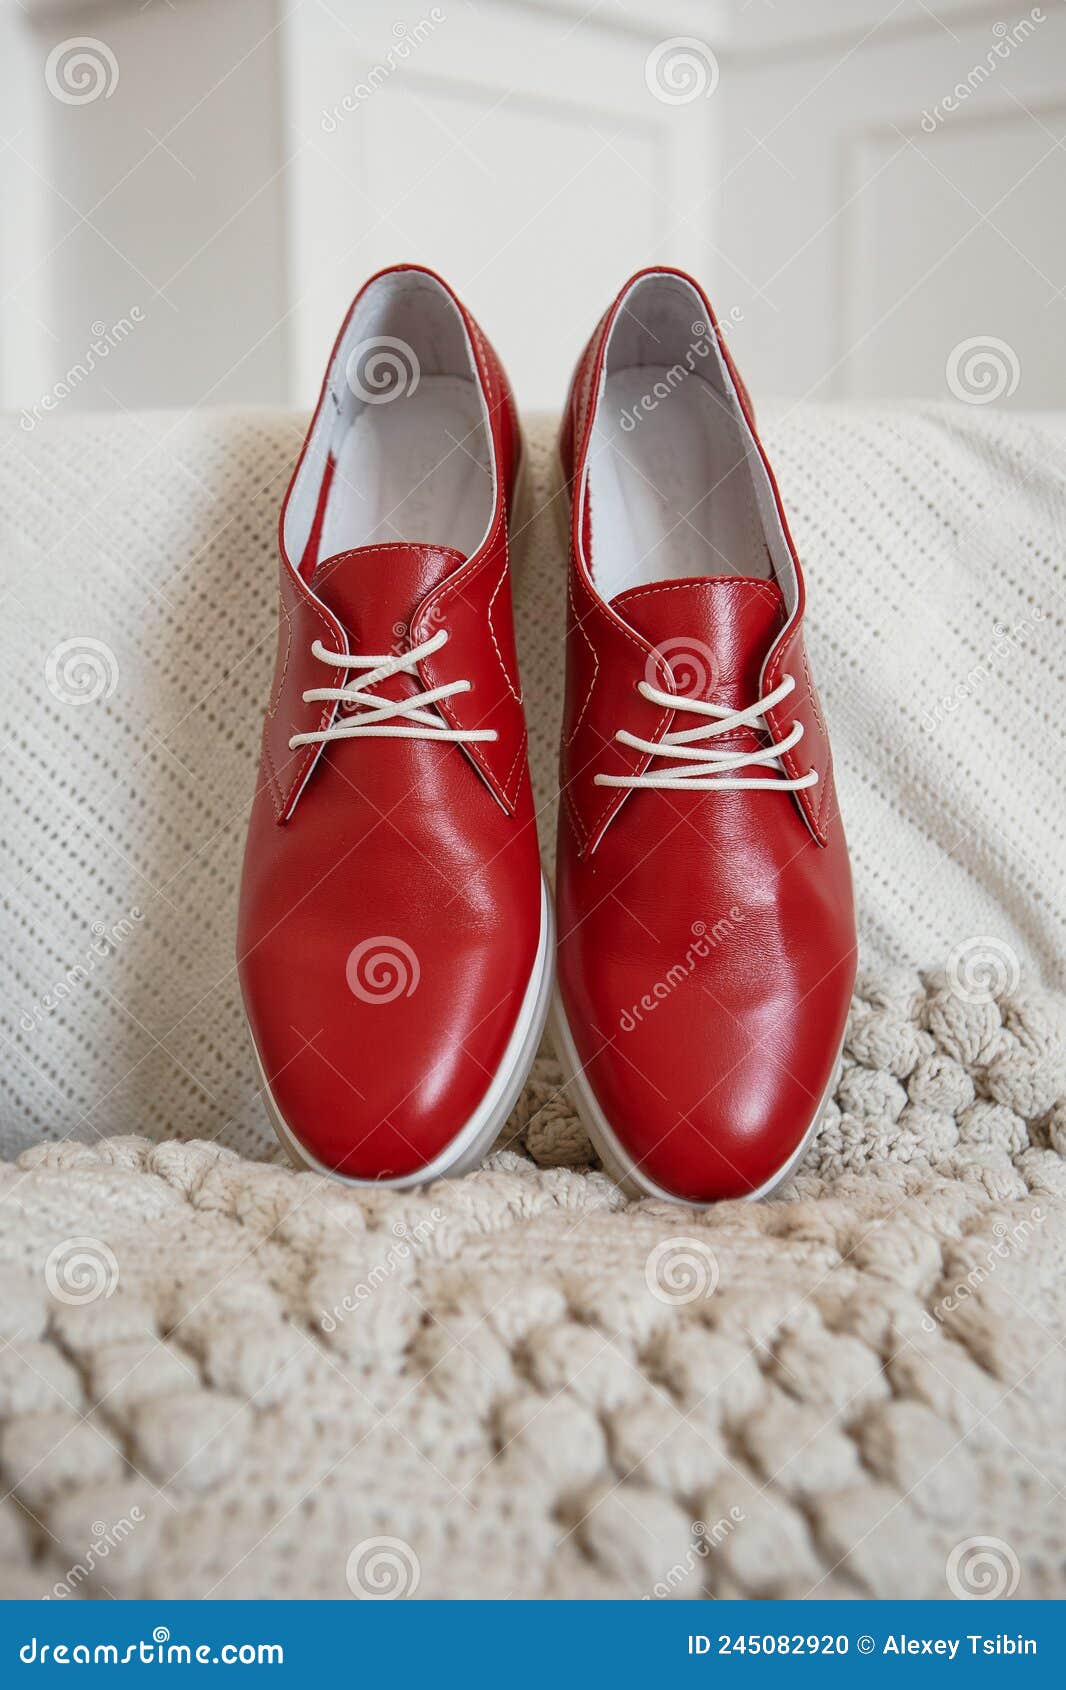 Red Shoes with White Laces, Which are on a White Knitted Scarf, Close ...